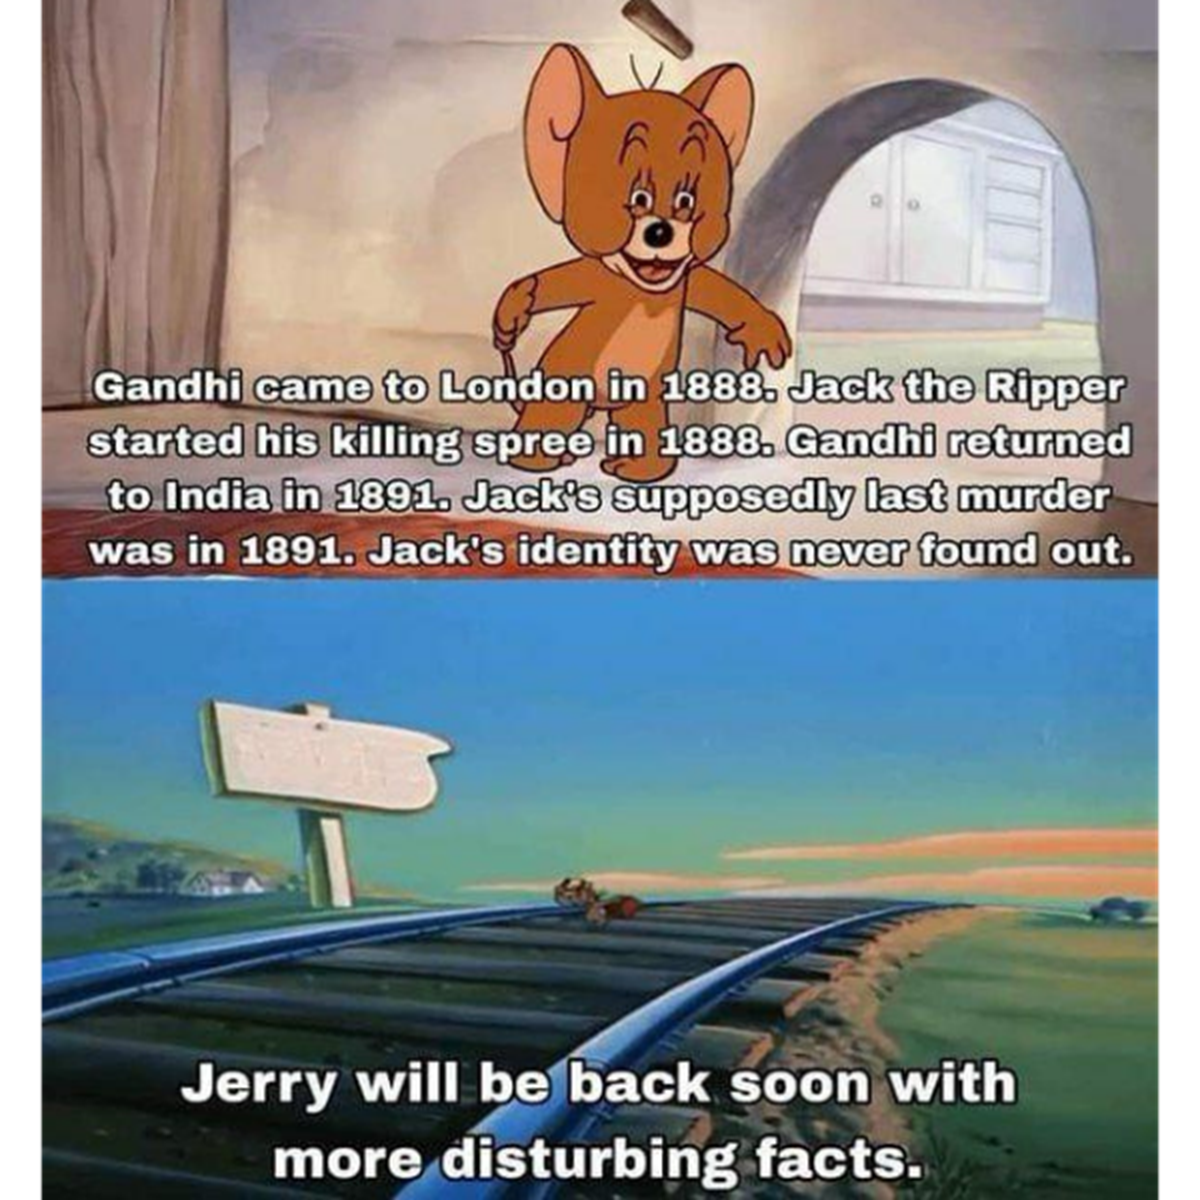 tom and jerry cartoon memes - Gandhi came to London in 1888. Jack the Ripper started his killing spree in 1888. Gandhi returned to India in 1891. Jack's supposedly last murder was in 1891. Jack's identity was never found out. Jerry will be back soon with 